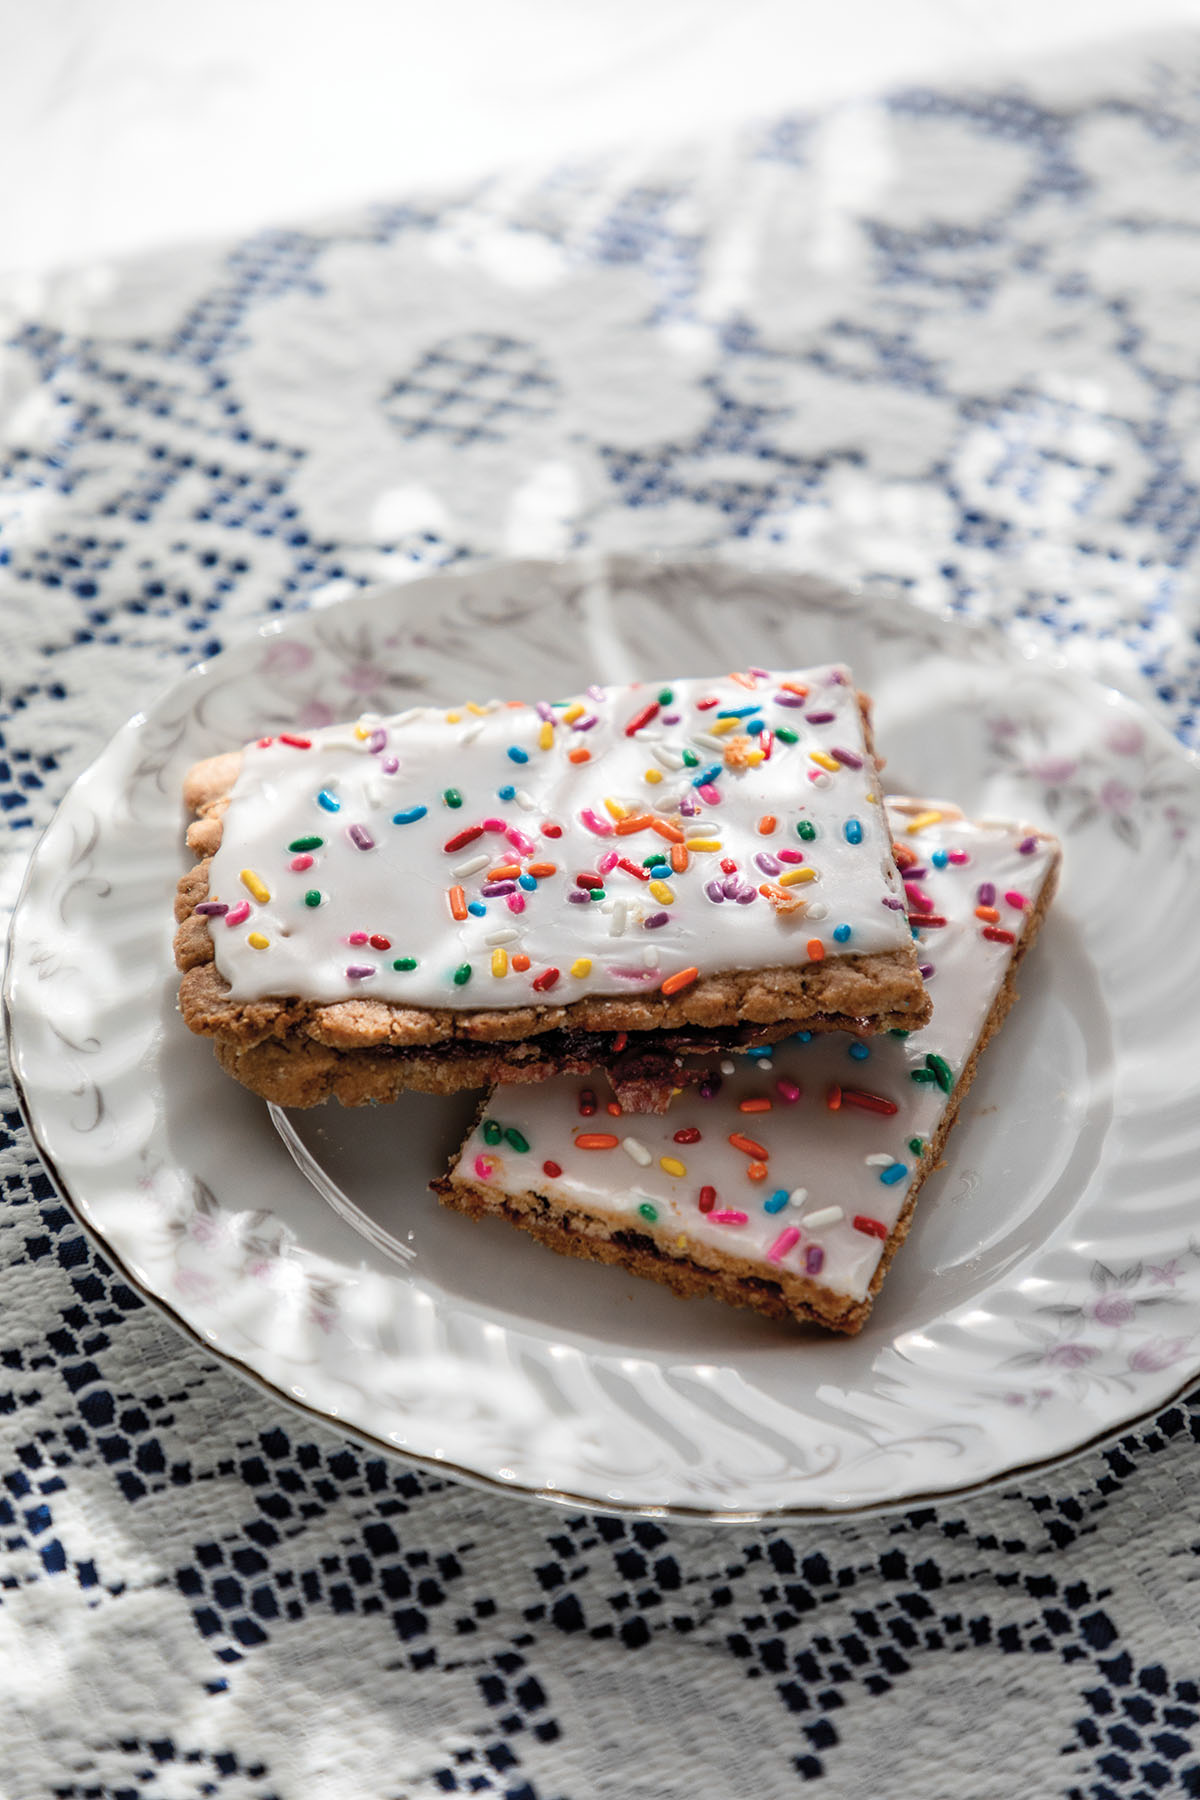 A pastry with white frosting and rainbow sprinkles on an ornate white plate